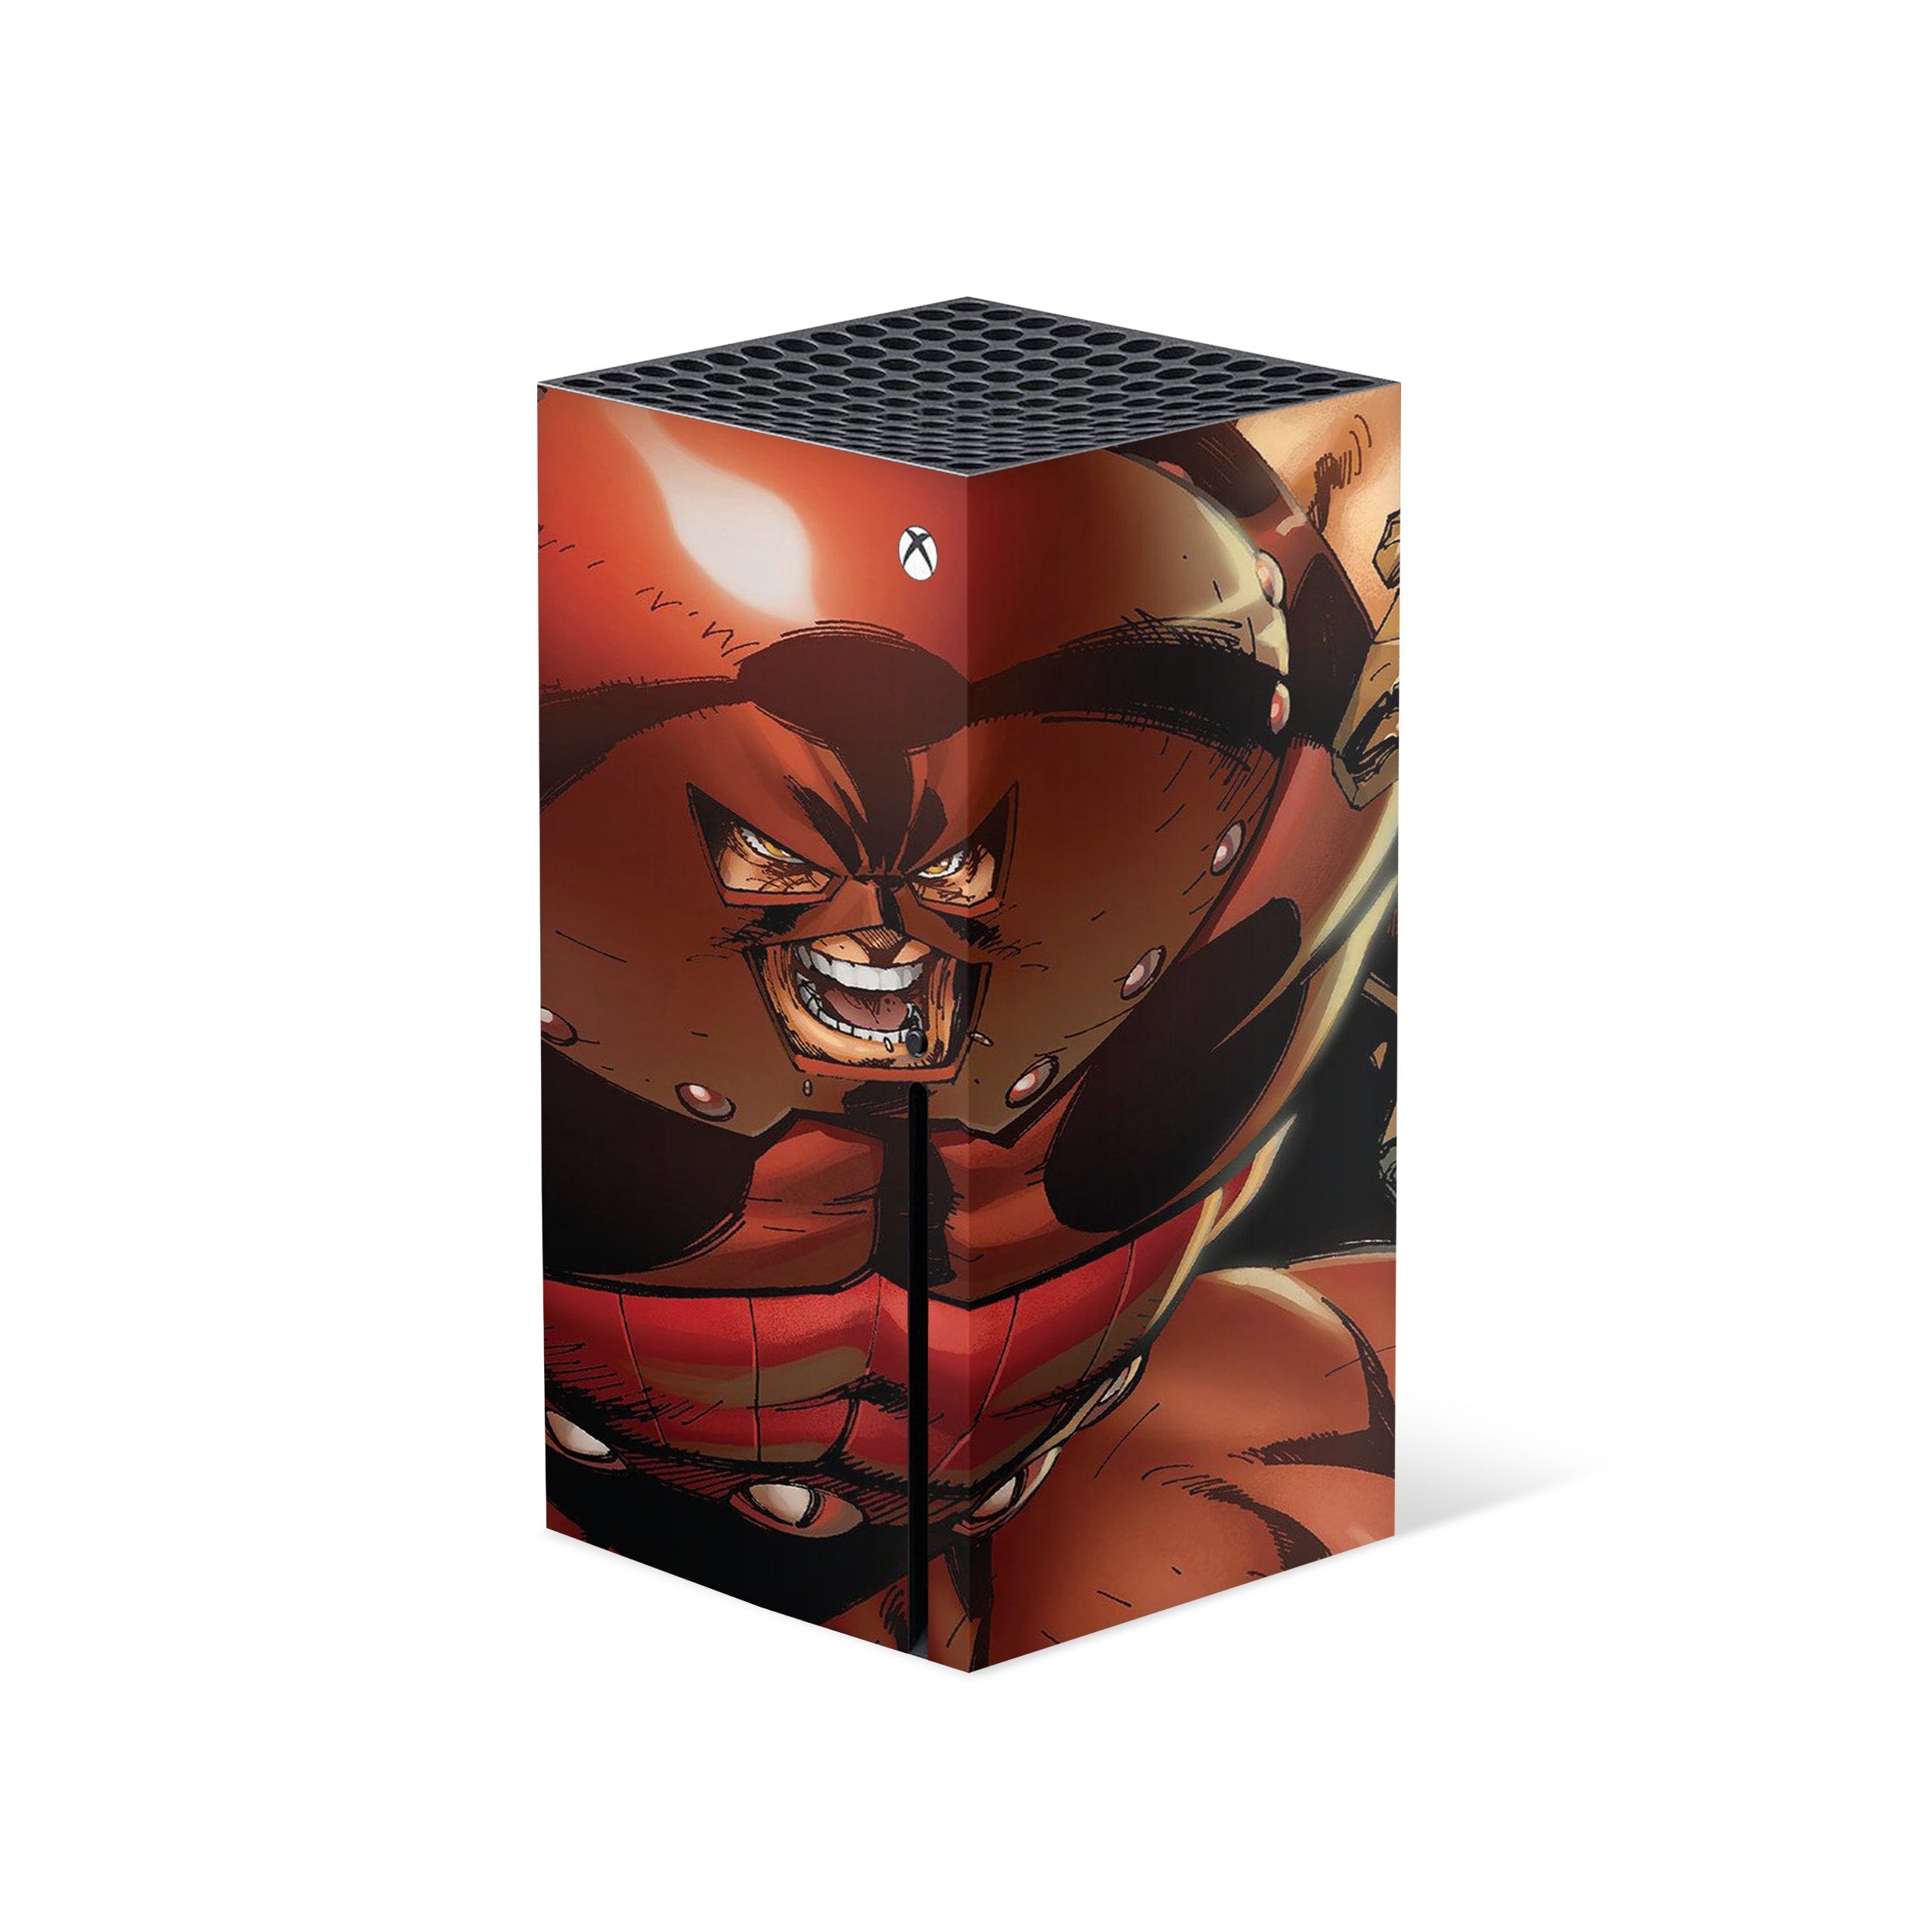 A video game skin featuring a Marvel Comics X Men Juggernaut design for the Xbox Series X.